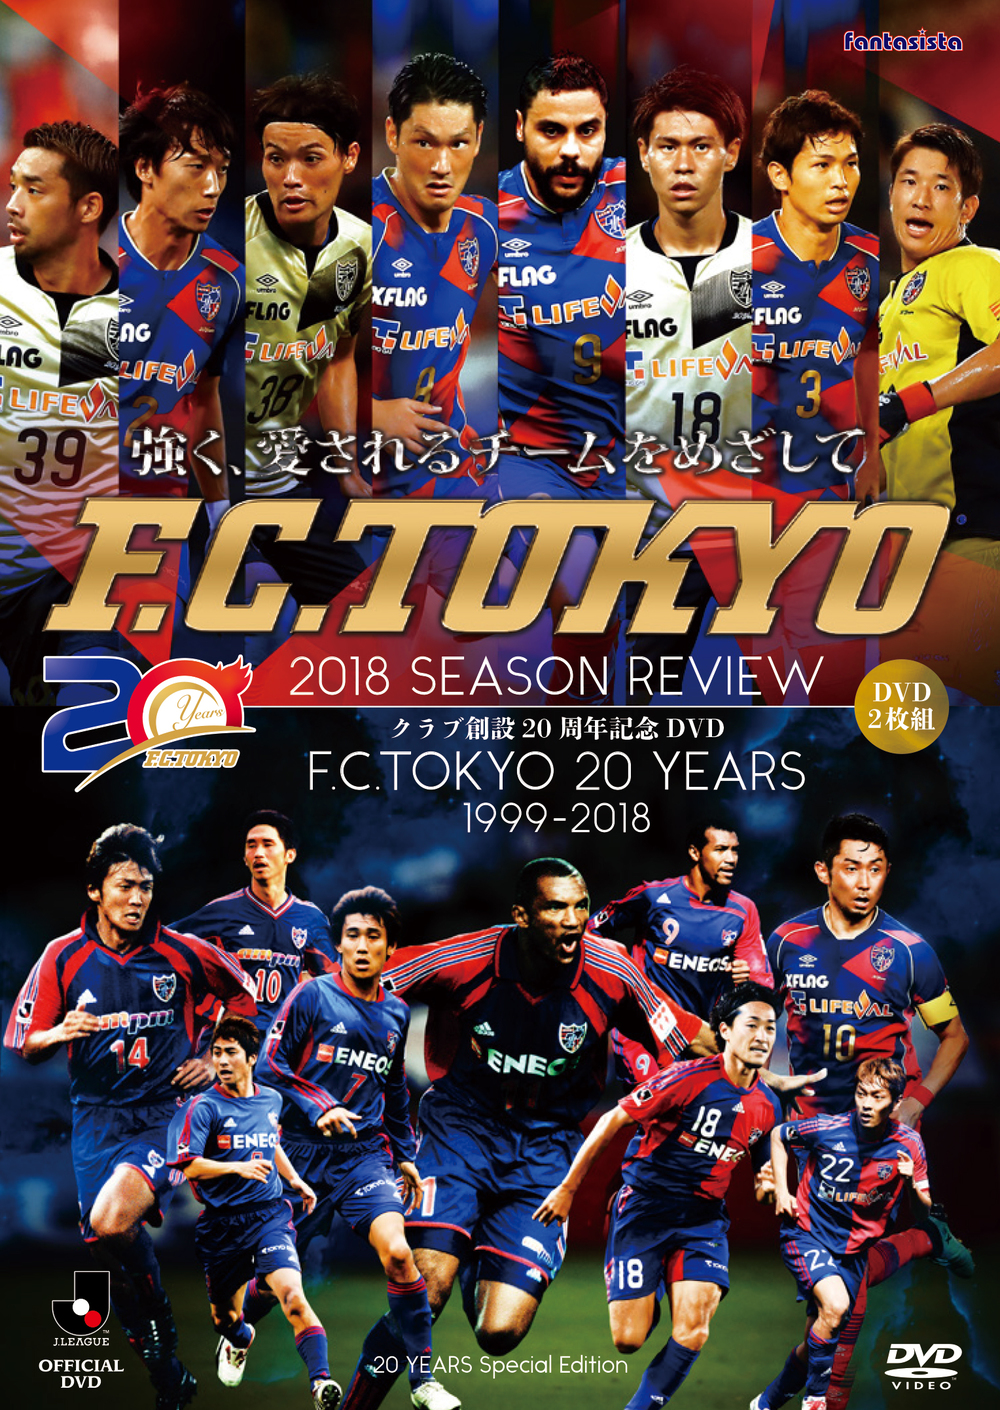 FC東京2018SEASON REVIEW 20 YEARS Special Edition』Blu-ray/DVD ...